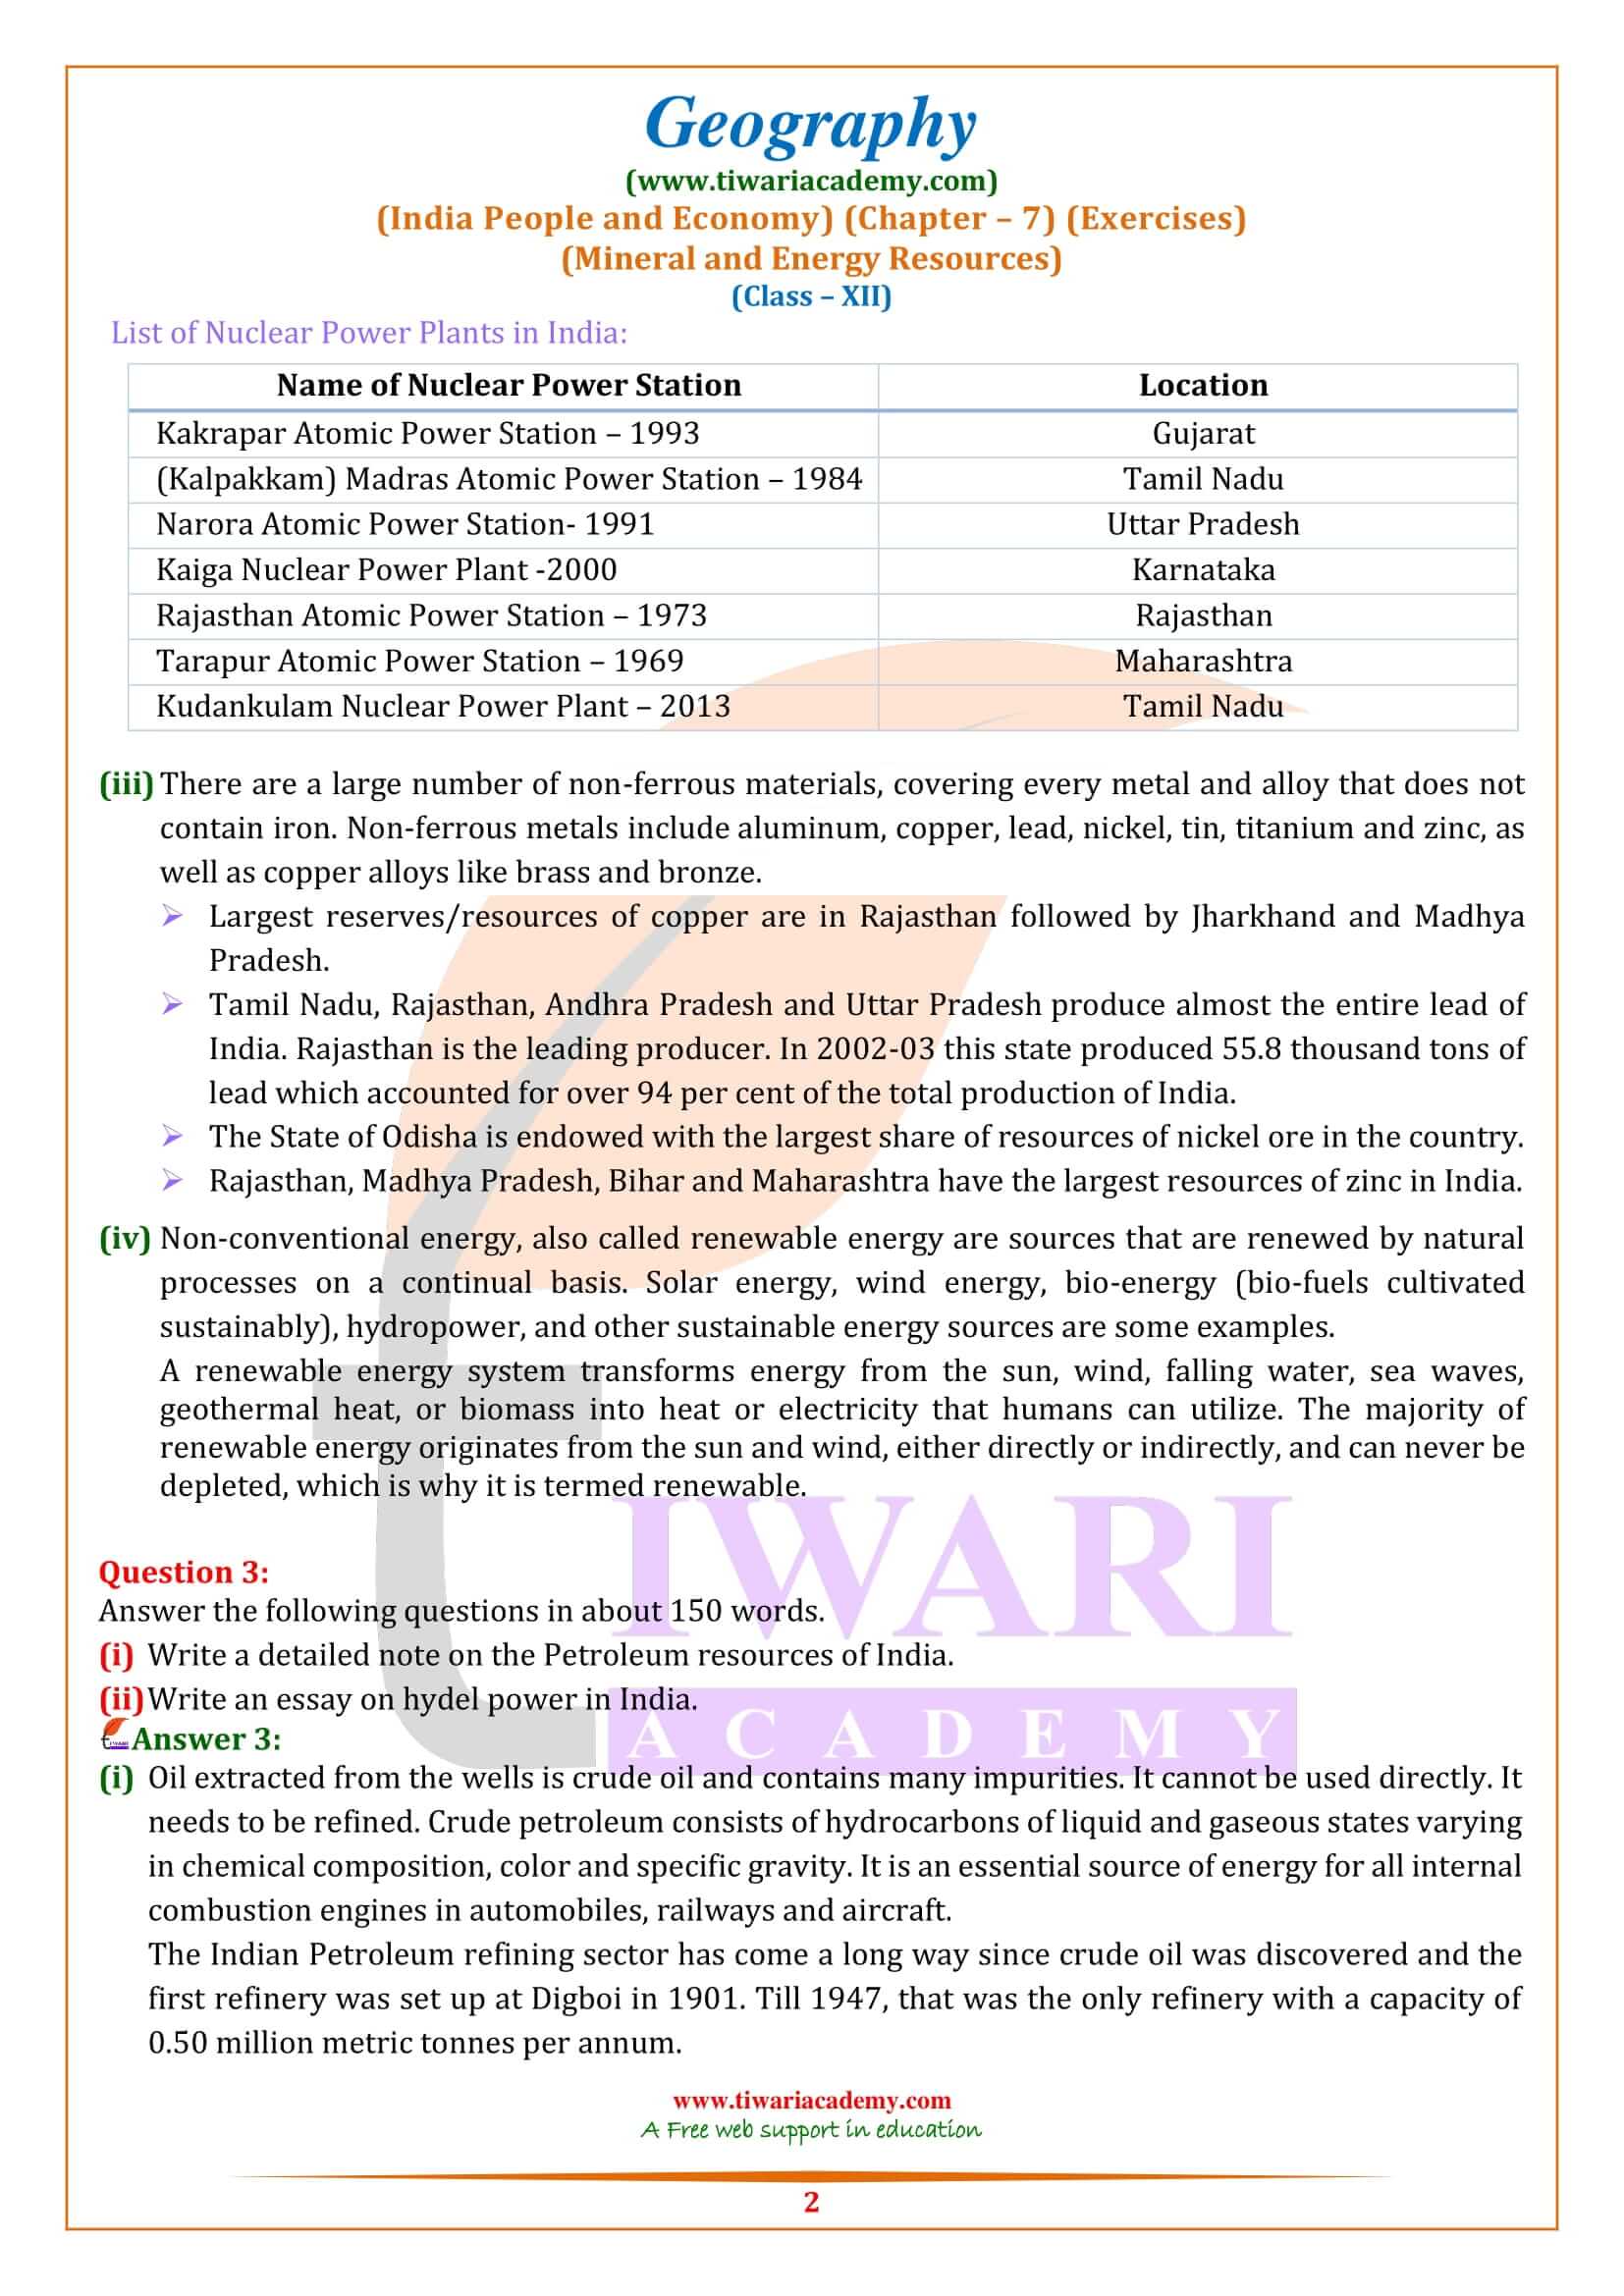 NCERT Solutions for Class 12 Geography Chapter 7 in English Medium